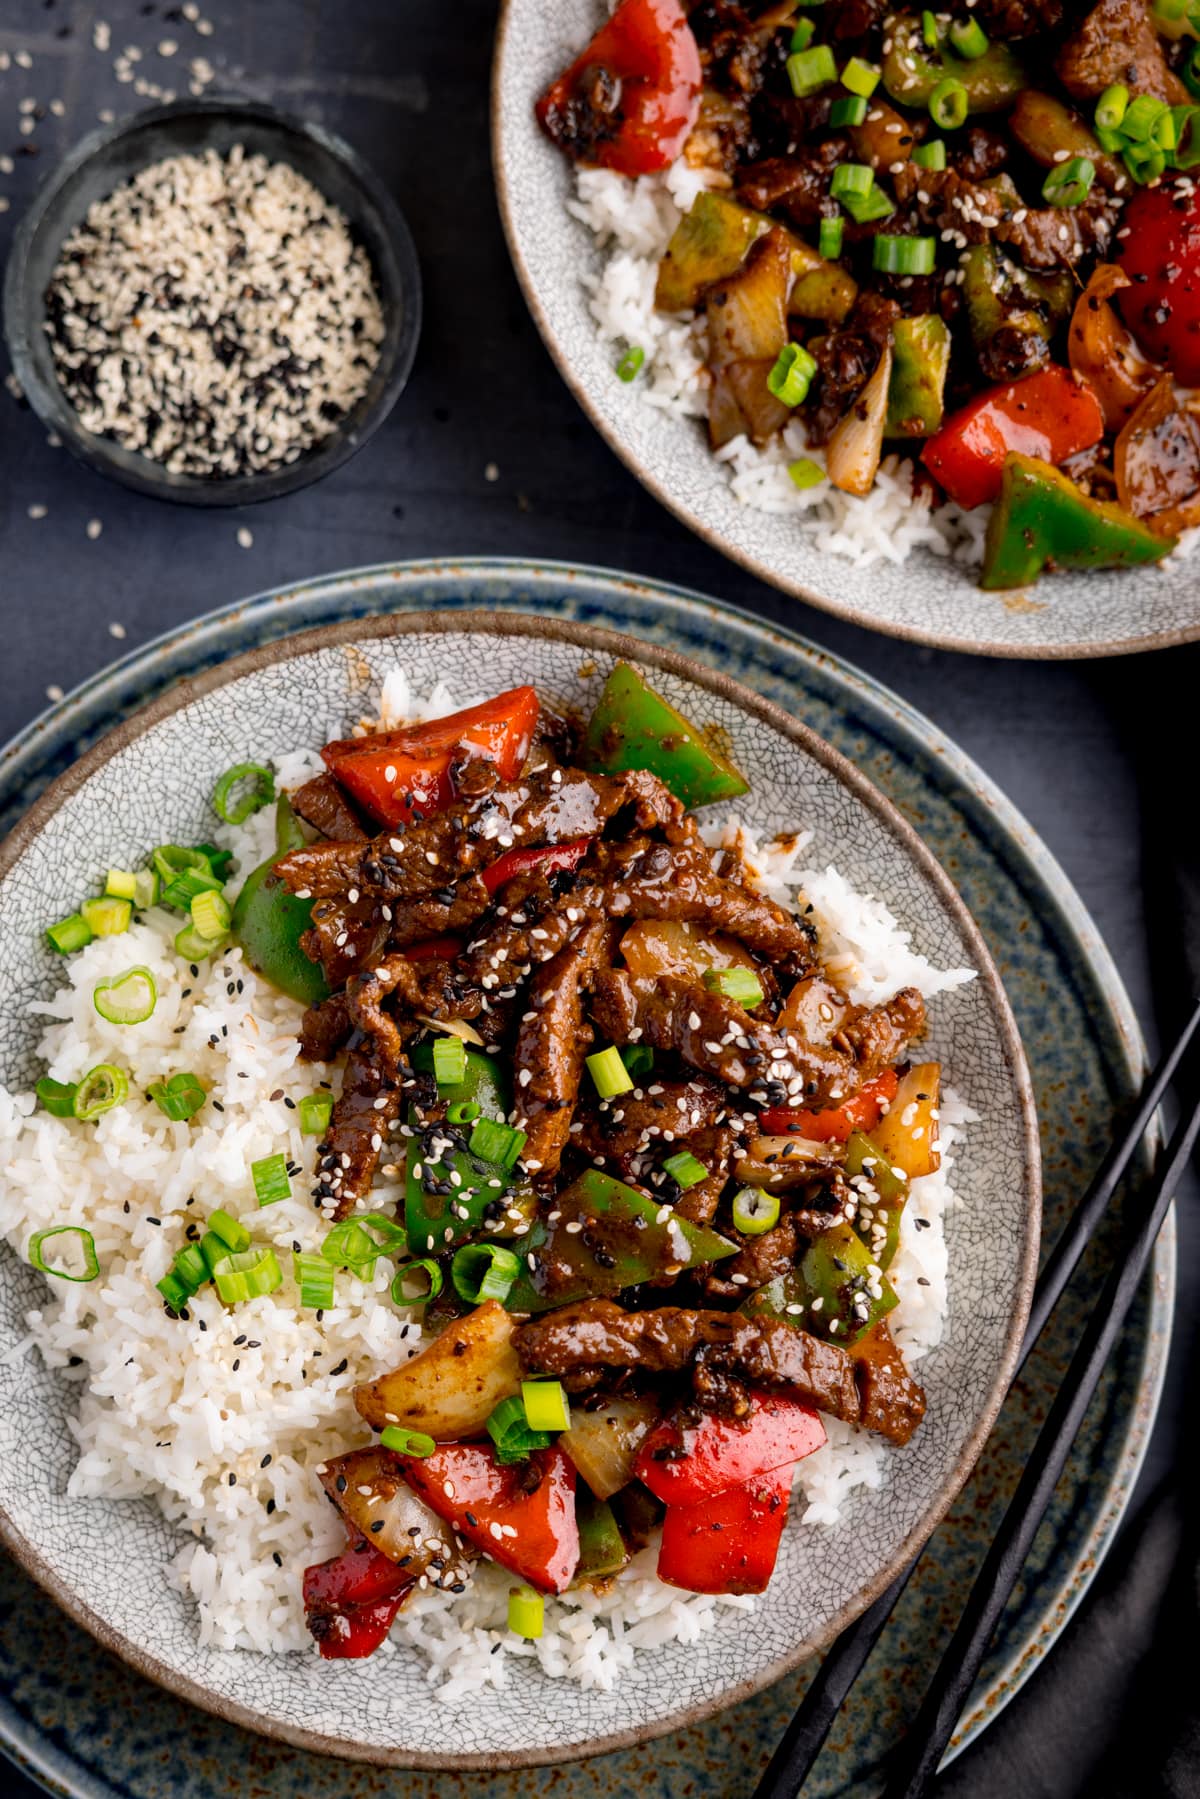 Beef in black bean sauce stir fry with boiled rice in a bowl, topped with spring onions and sesame seeds. The bowls is on a dark surface and there is a further bowl in shot. There is a small bowl of black and white sesame seeds nearby.